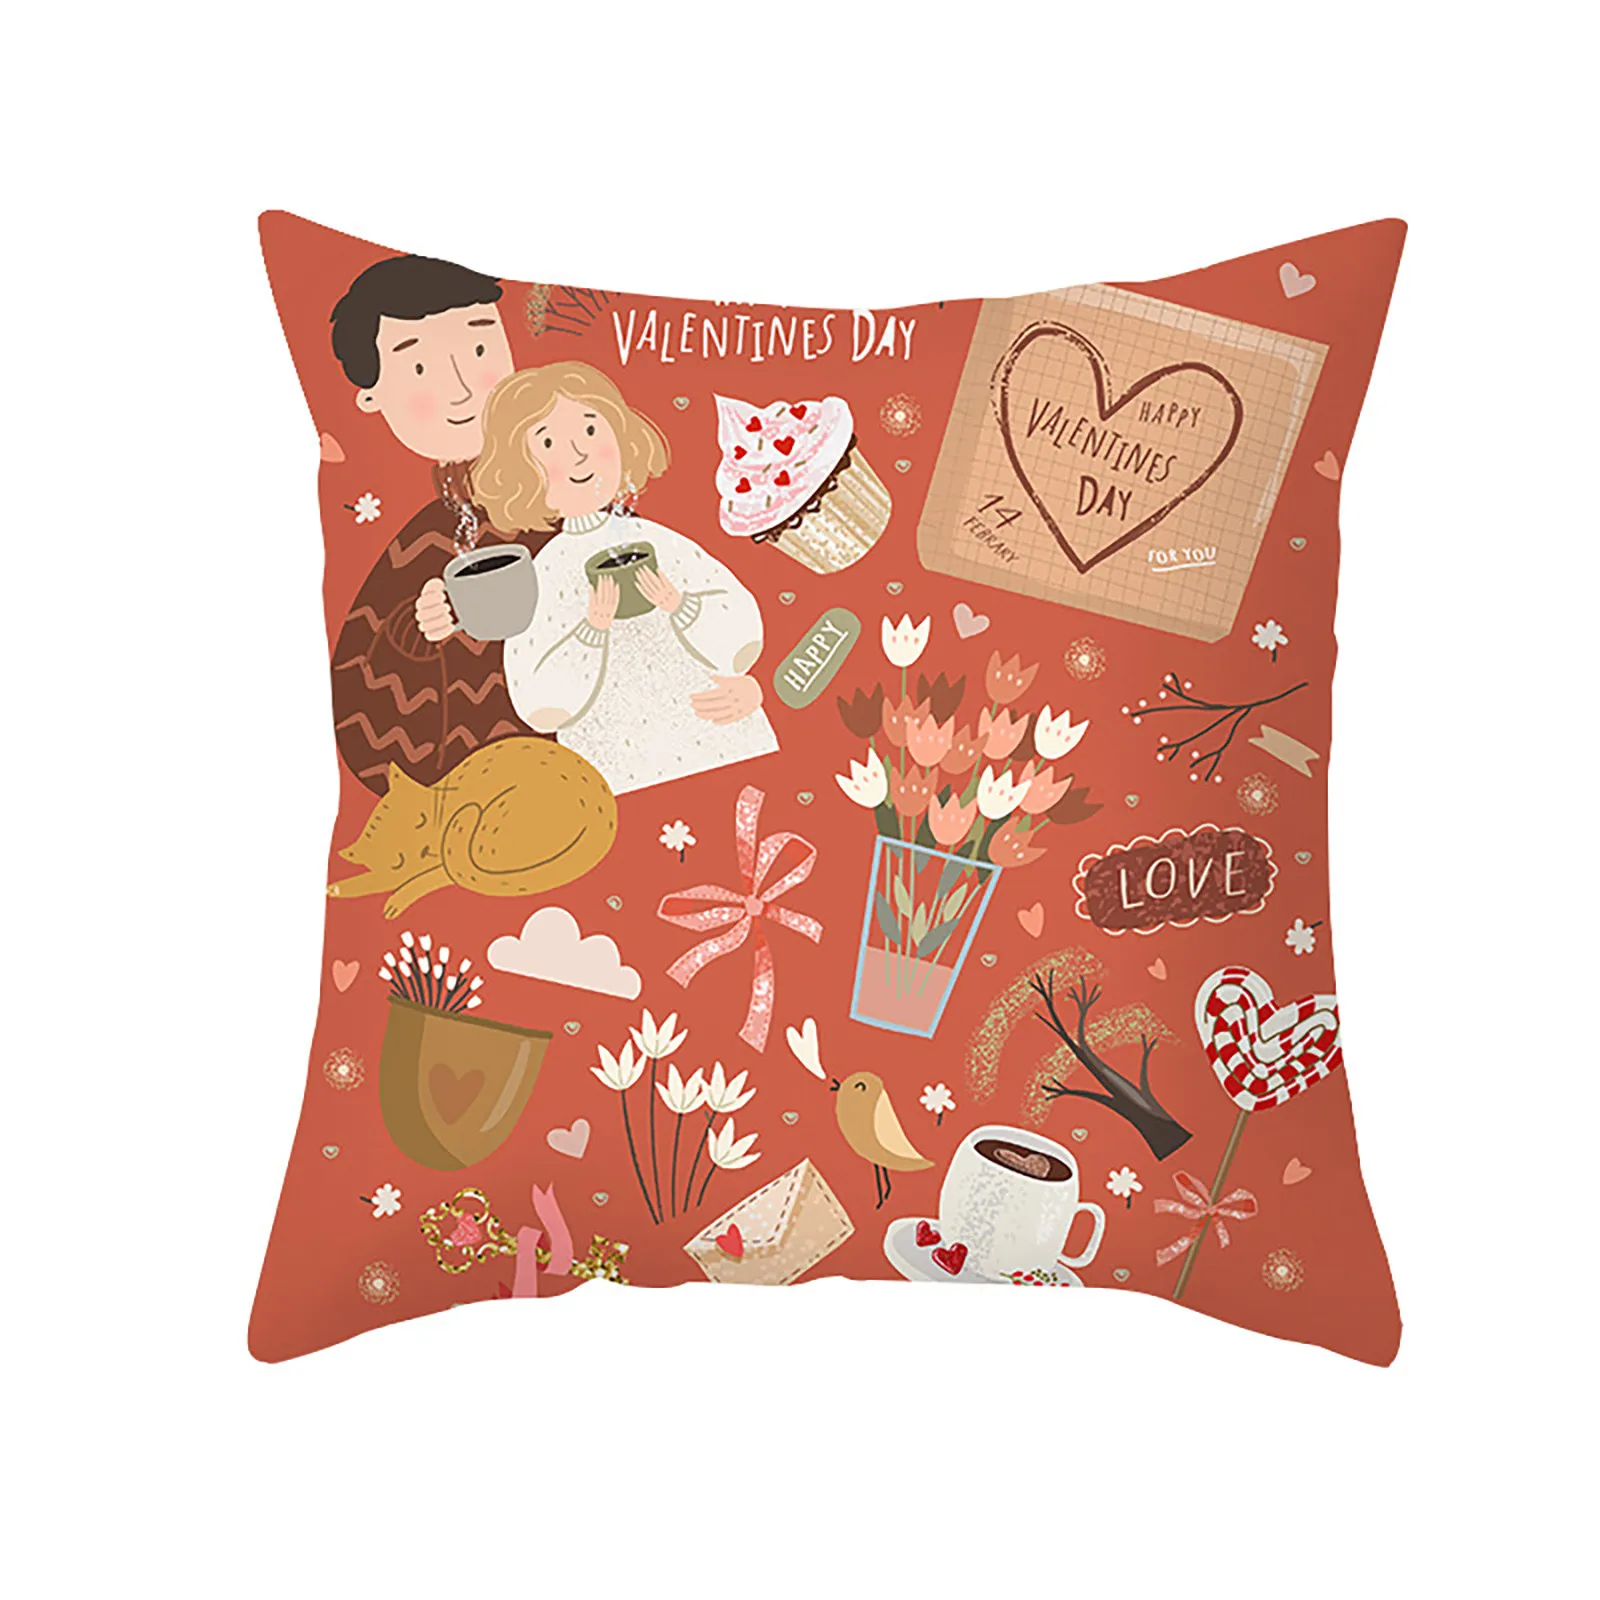 

Valentines Day Pillow Covers Throw Pillowcase Cushion Case For Sofa Couch Valentine Decorations Throw White 16x16 Pillow Cover